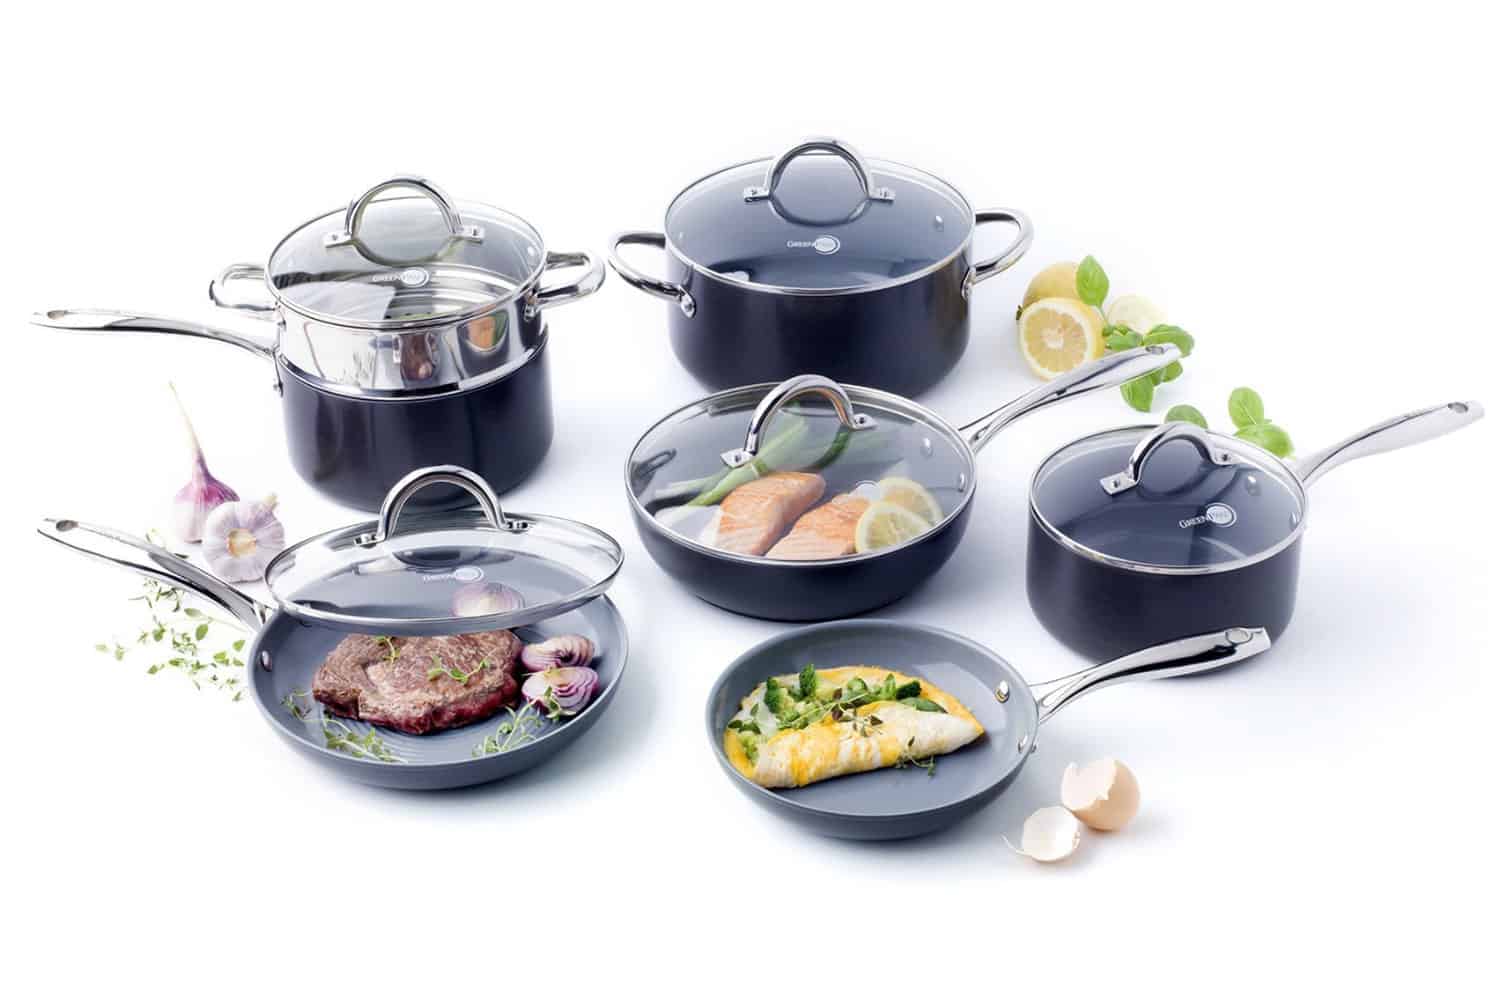 Top 5 Best (and Tested) Ceramic Cookware Set Reviews of 2017